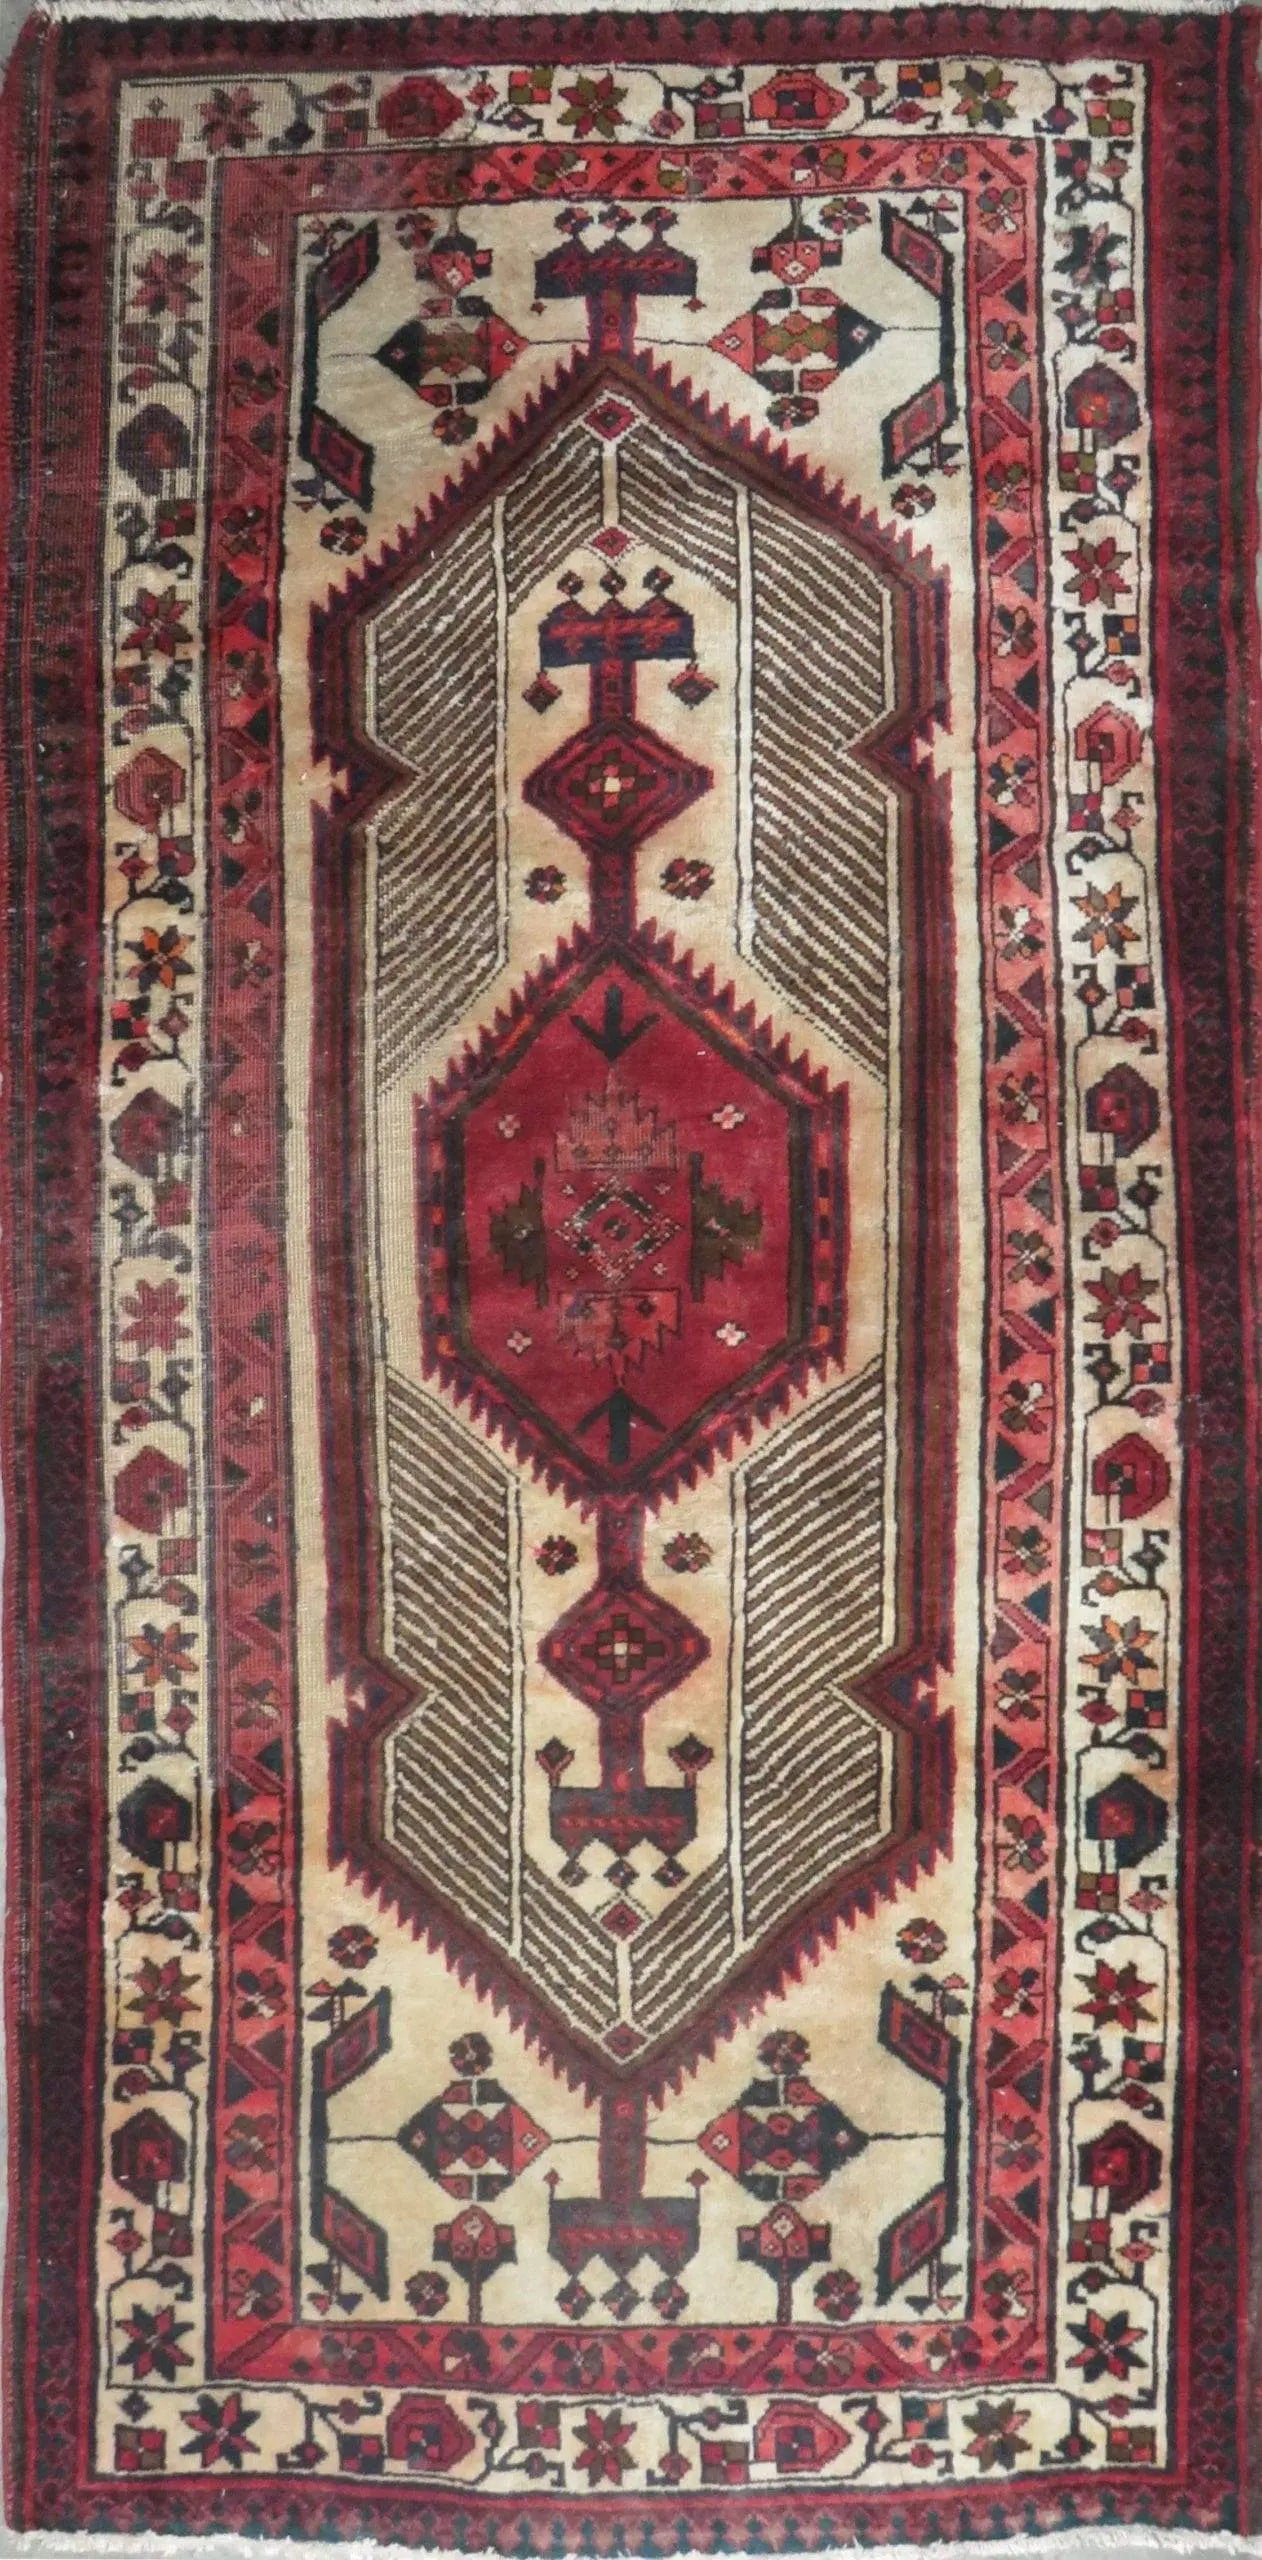 Hand-Knotted Persian Wool Rug _ Luxurious Vintage Design, 7'6" x 3'7", Artisan Crafted